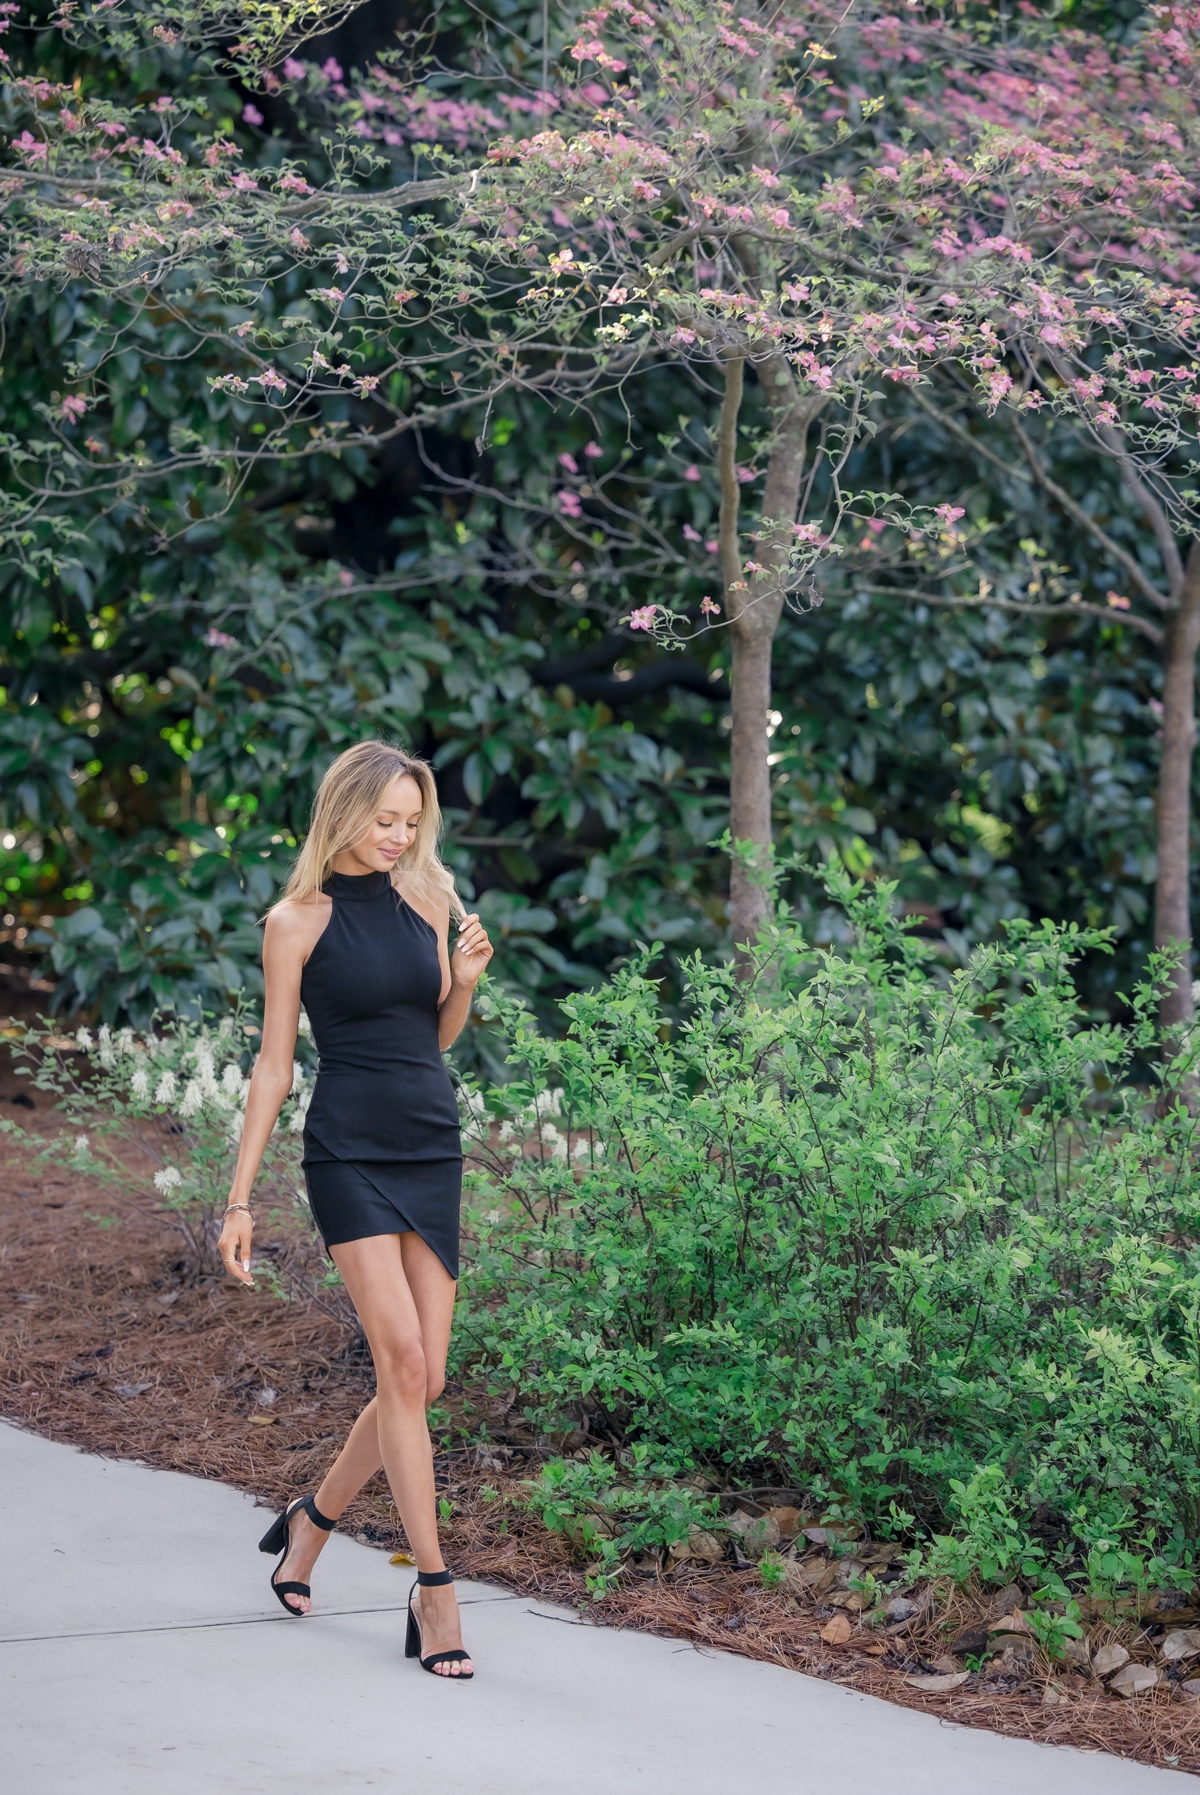 UGA graduate walks through a garden on campus playing and looking down at her hair